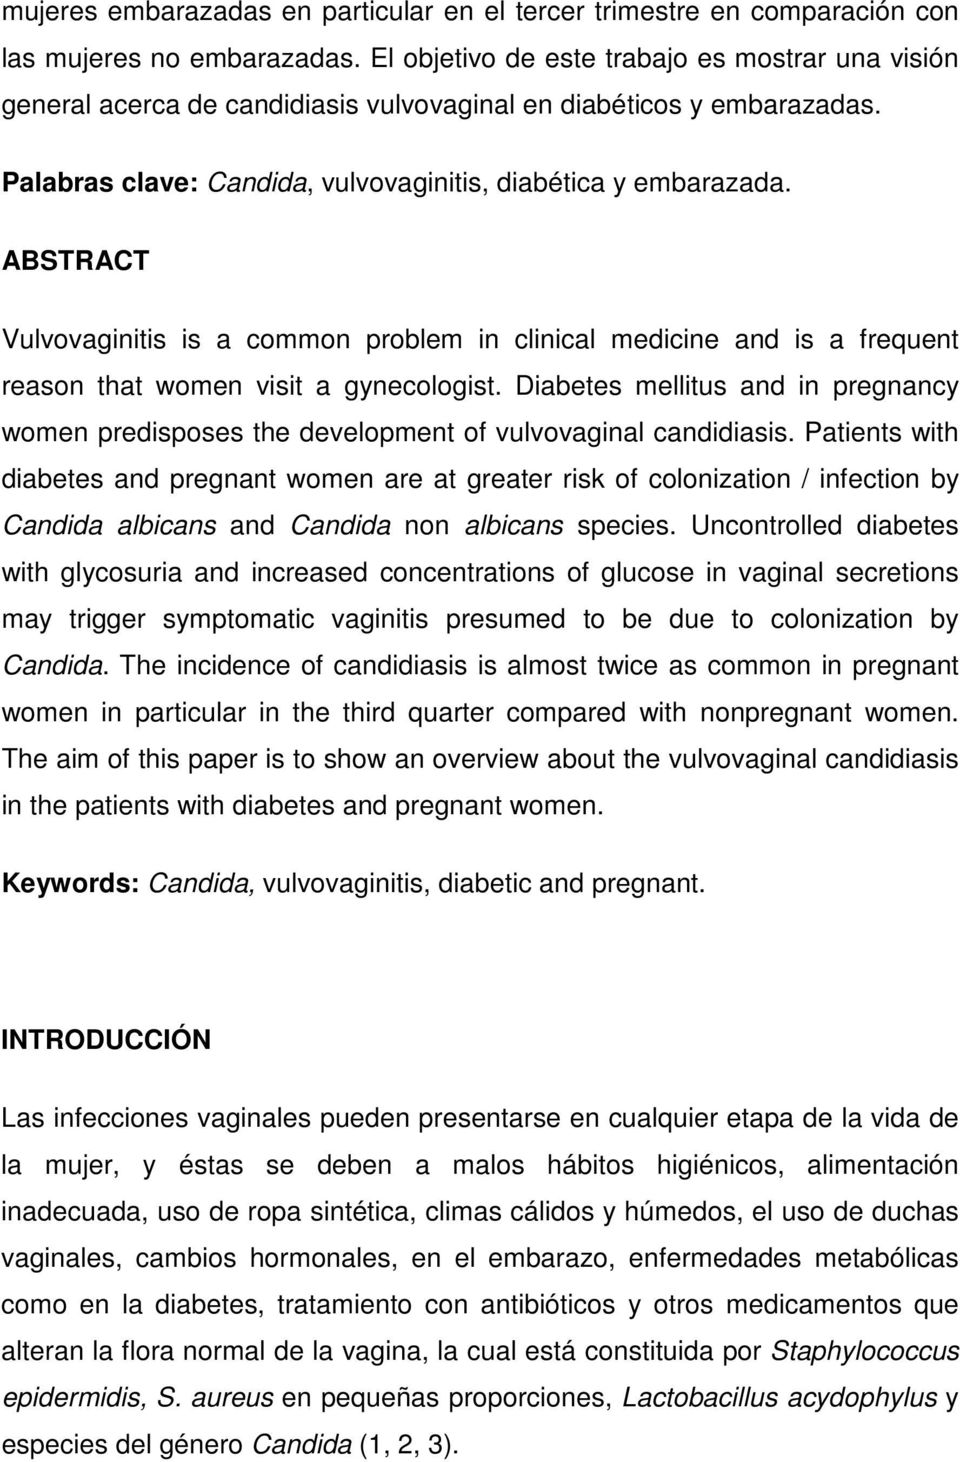 ABSTRACT Vulvovaginitis is a common problem in clinical medicine and is a frequent reason that women visit a gynecologist.